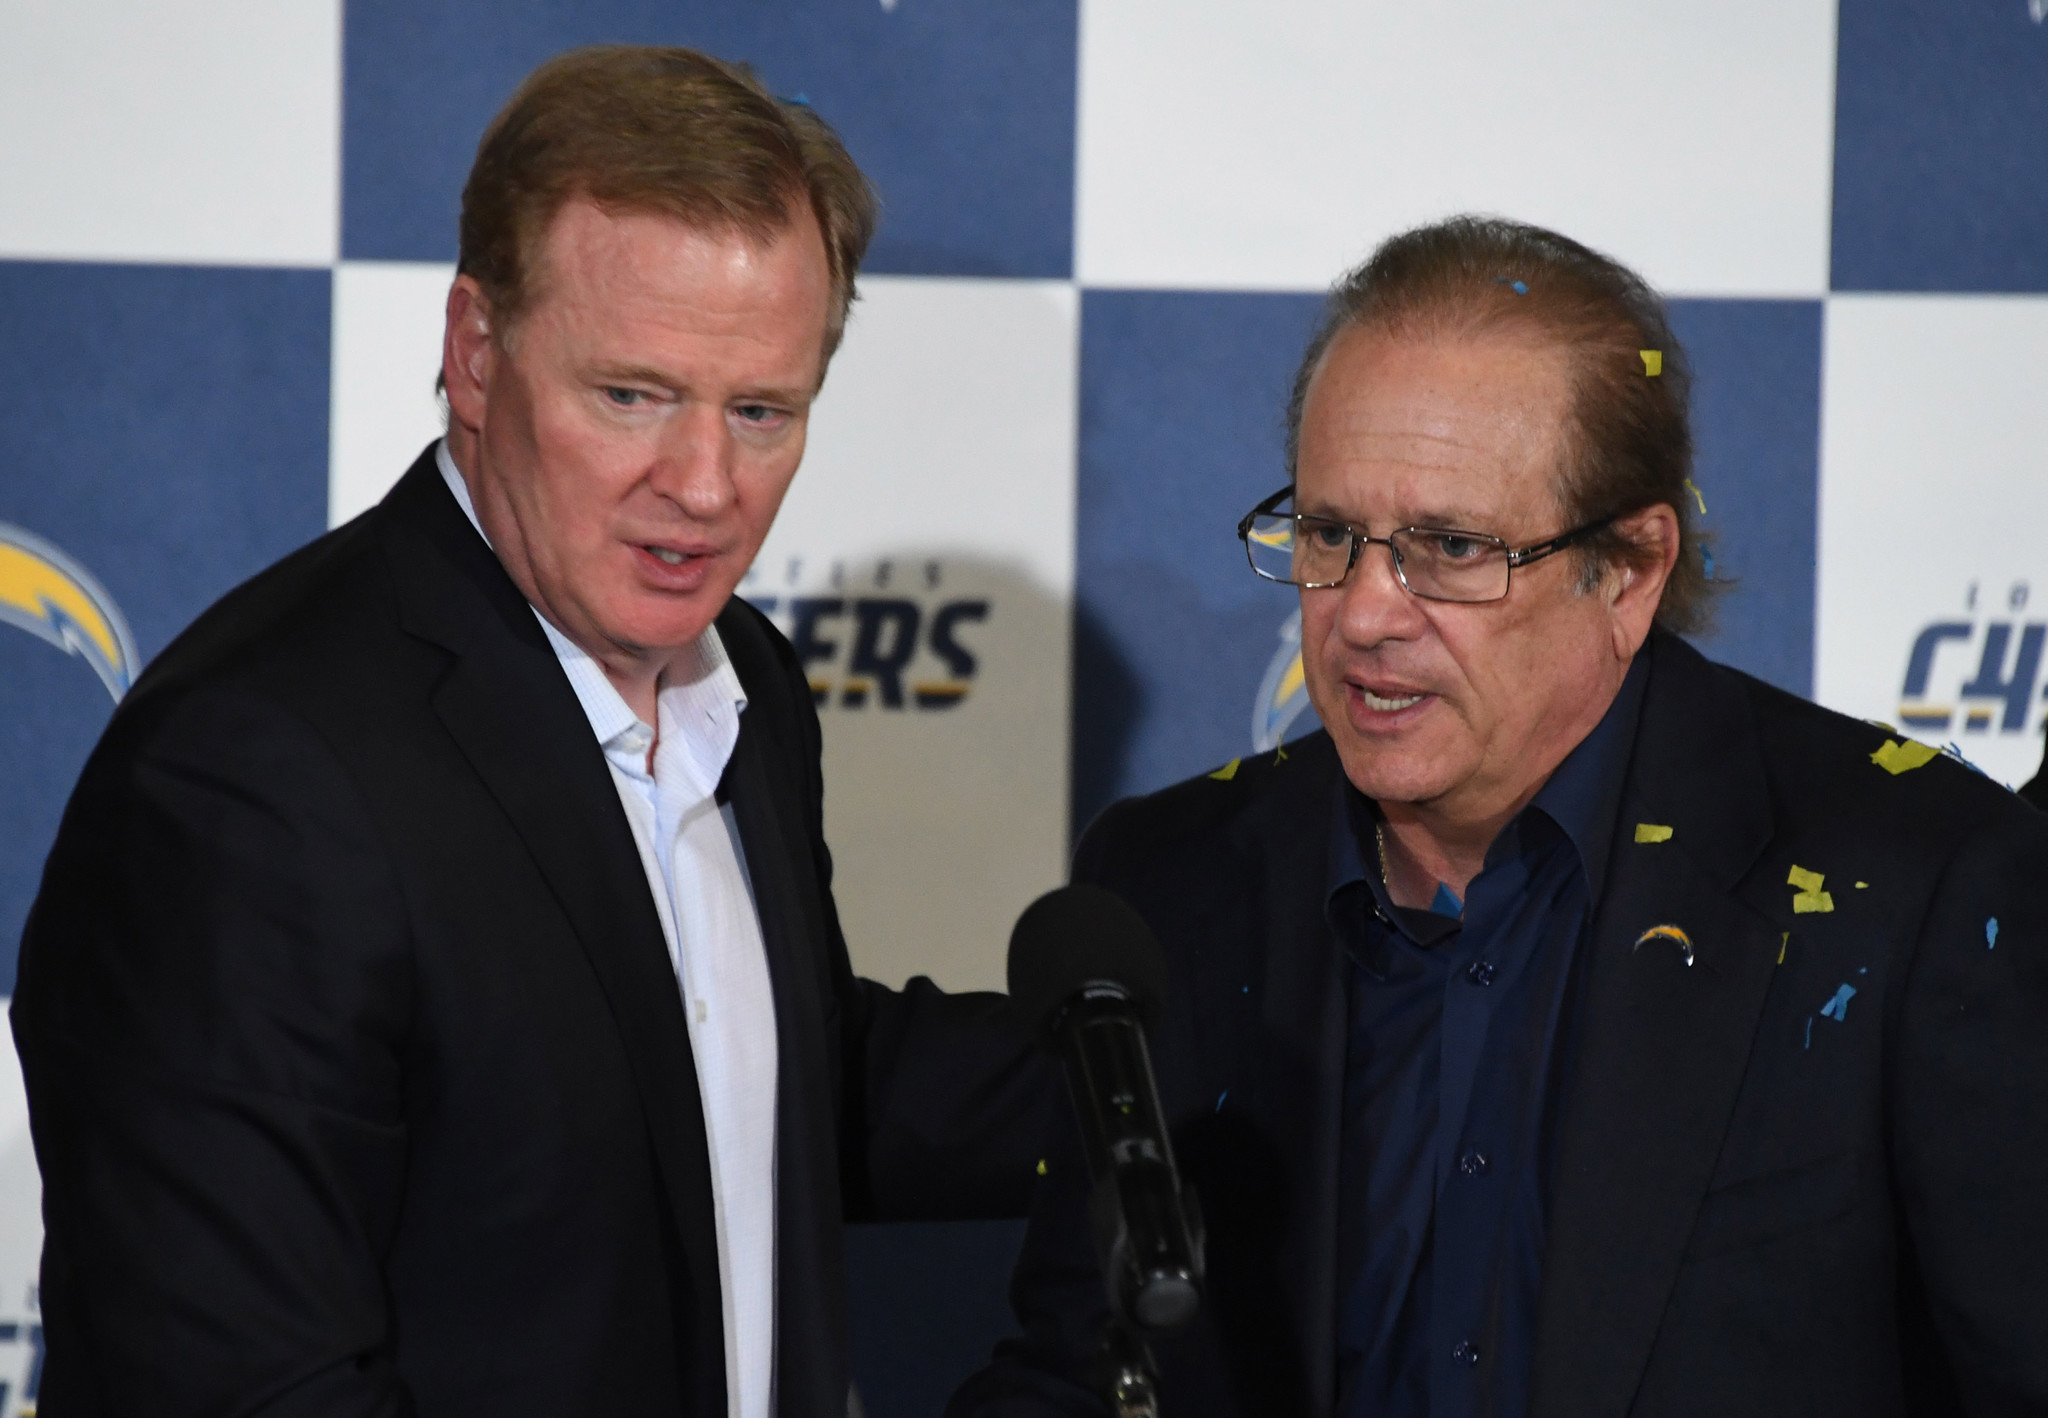 Goodell could have learned from Silver, helped SD - The San Diego Union-Tribune